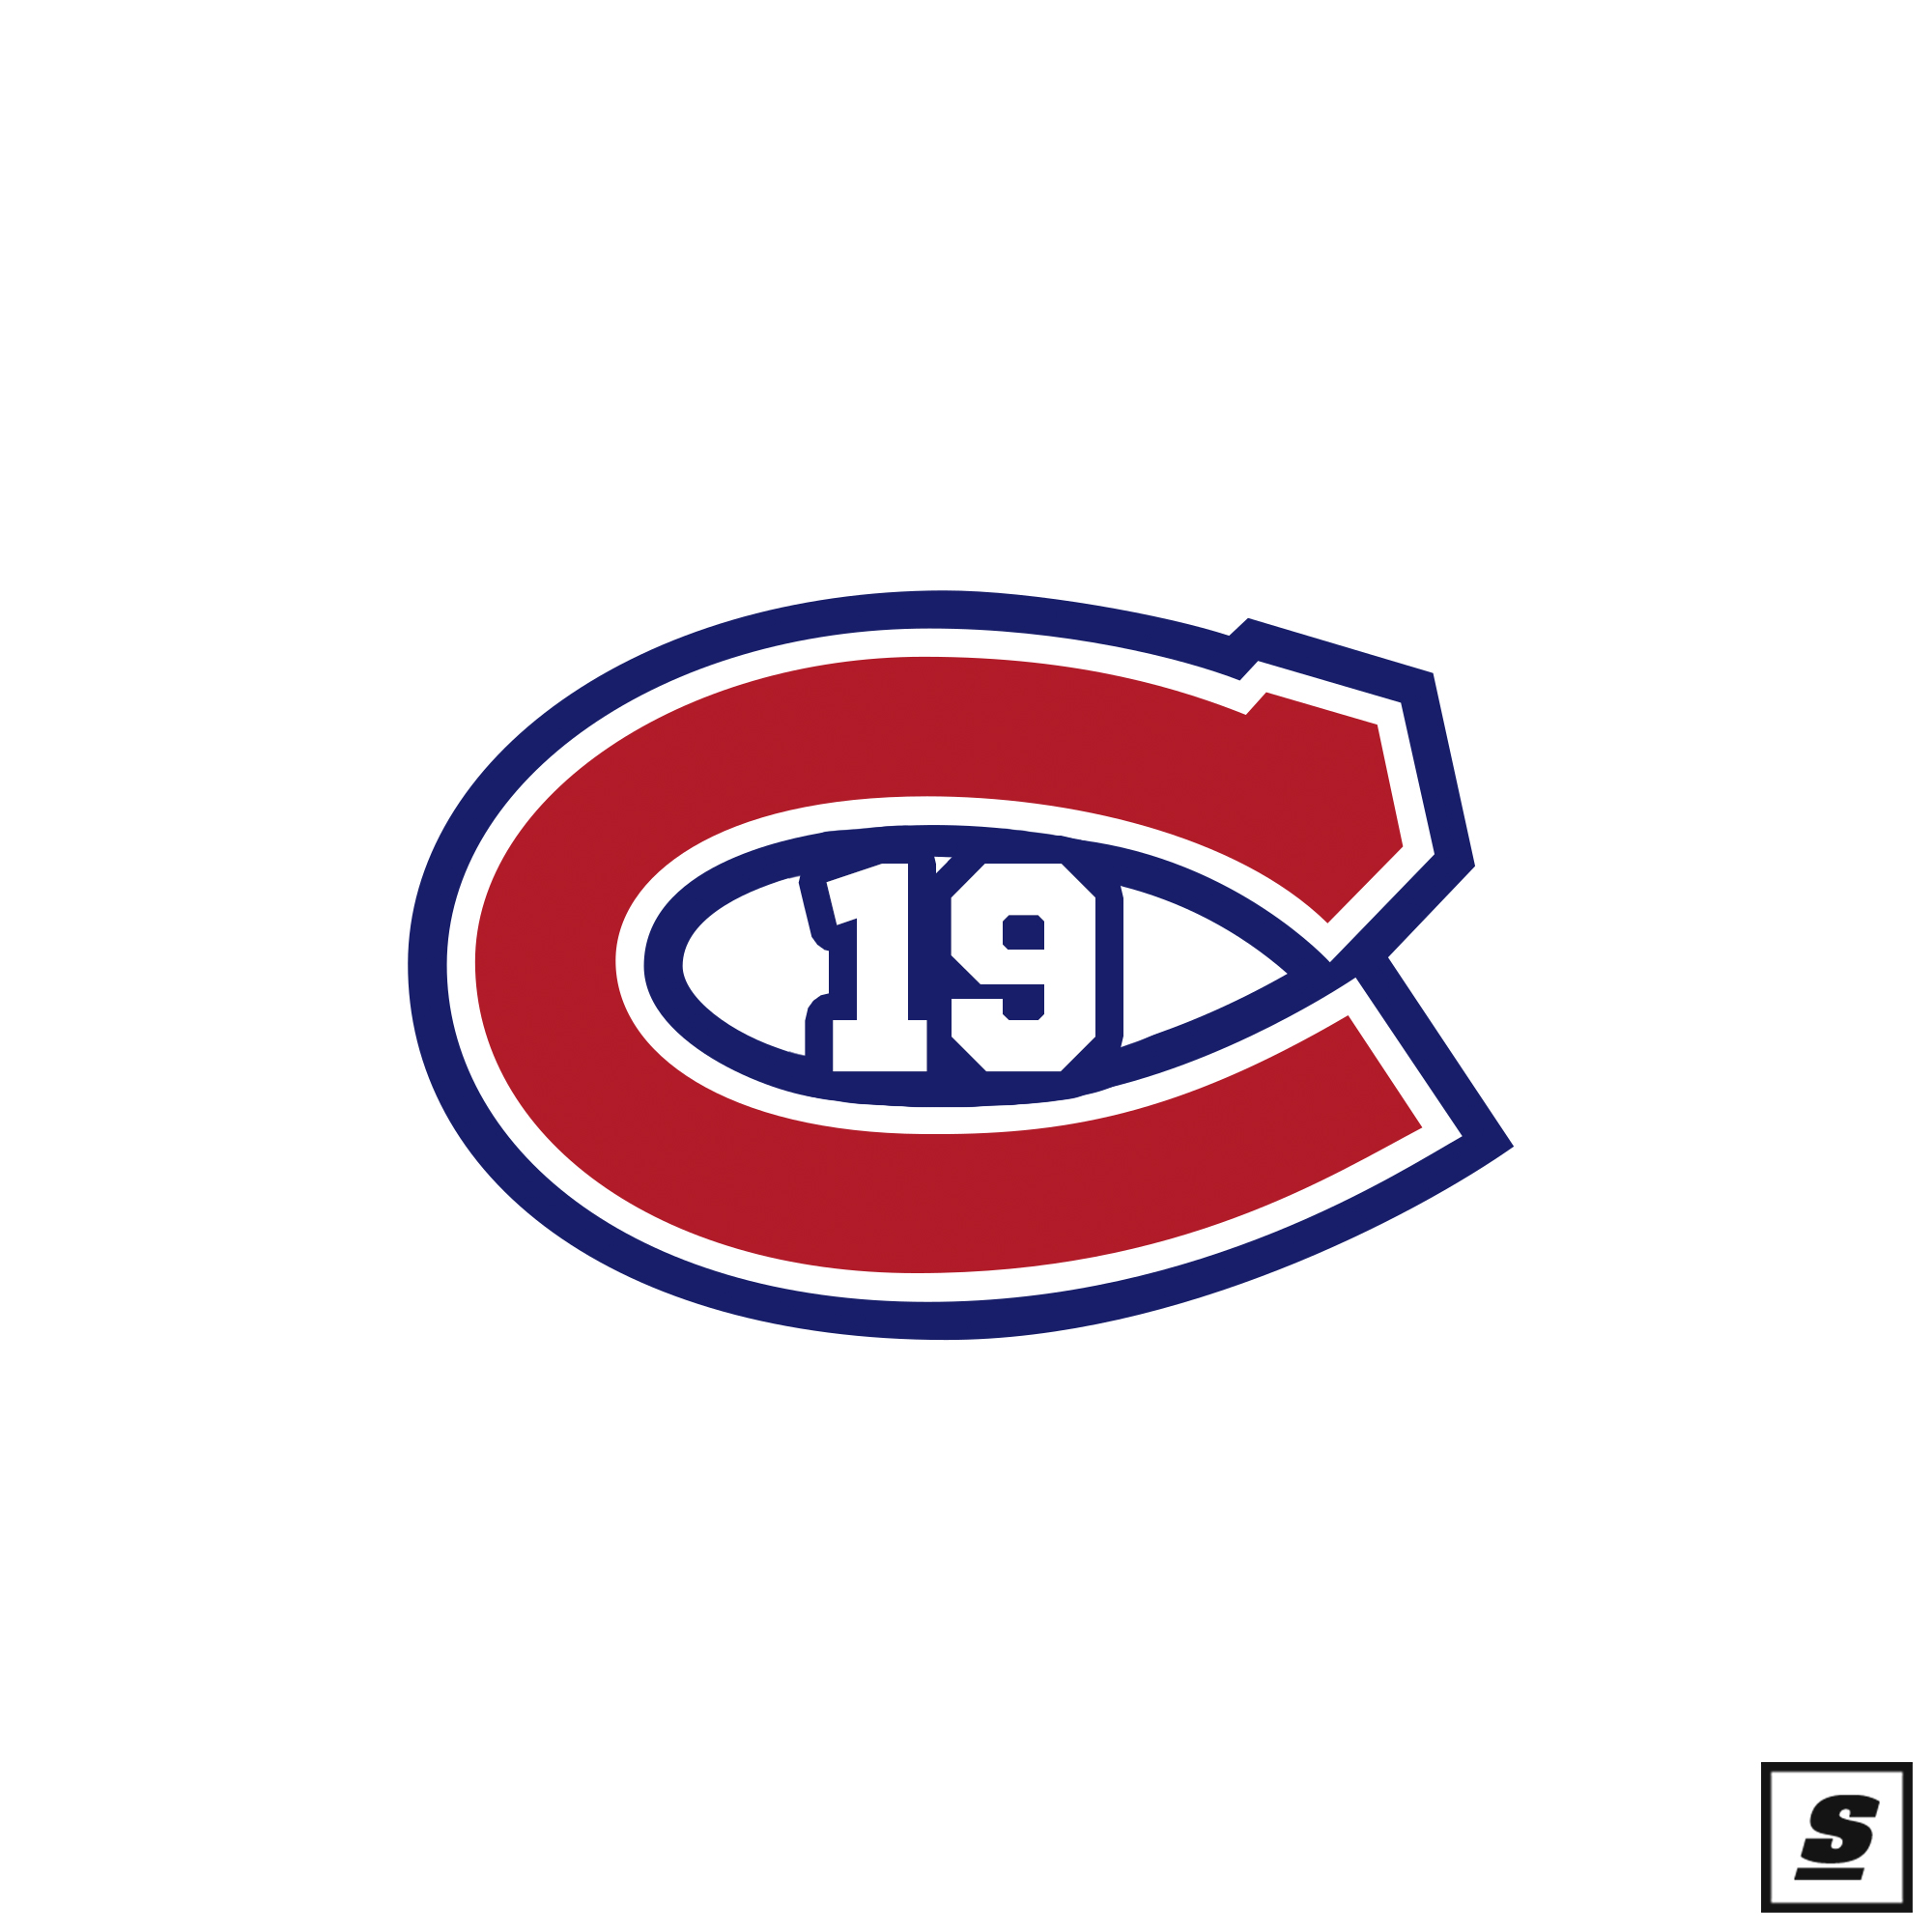 Montreal Canadiens logo into a COVID-19 